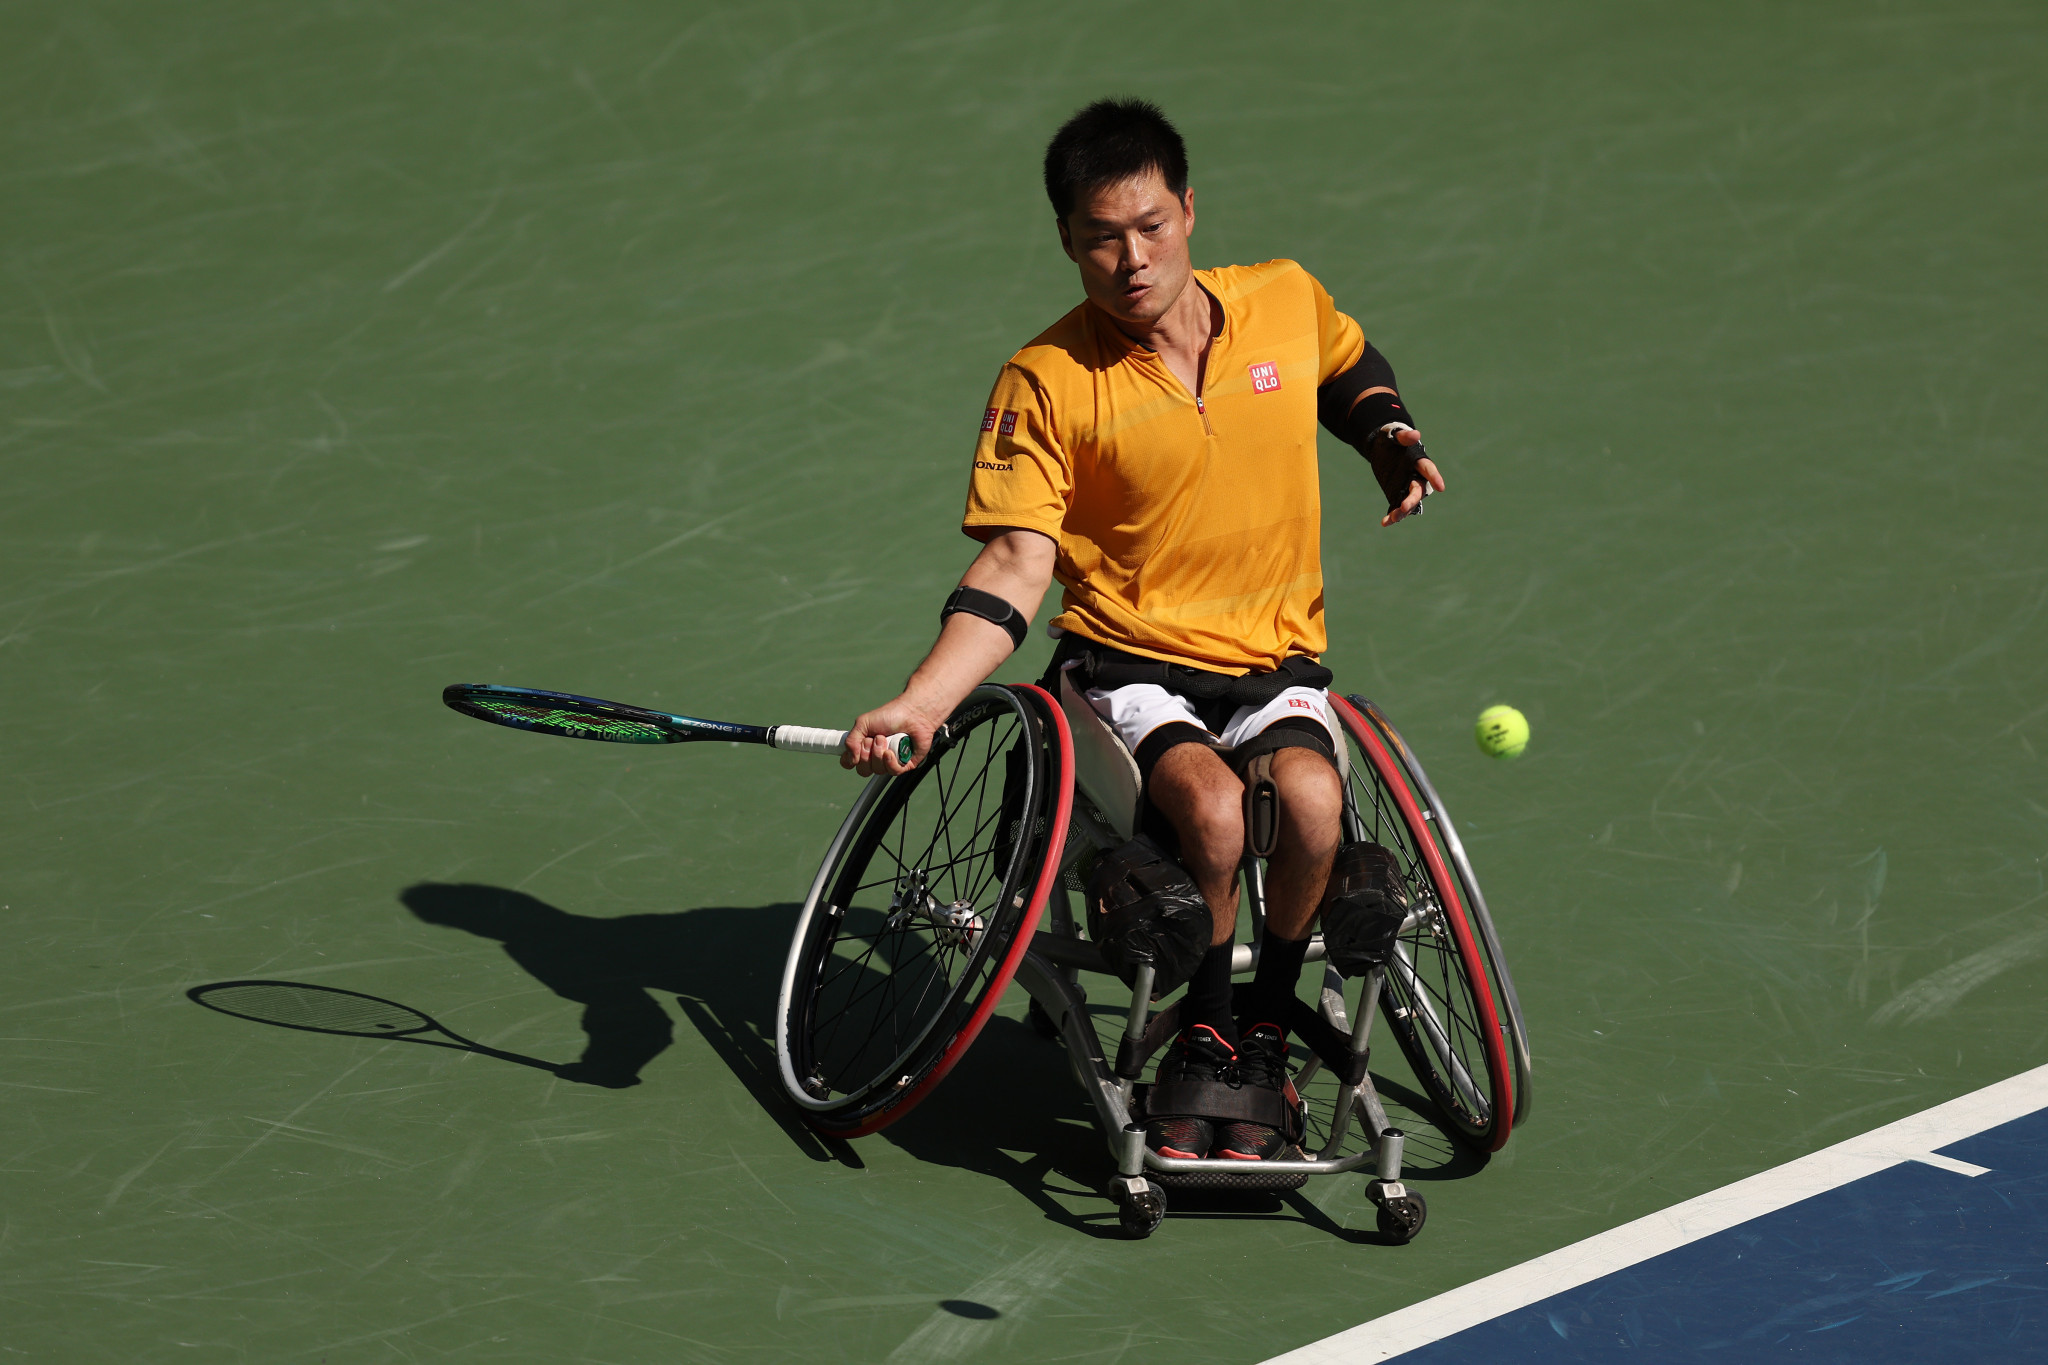 Top seeds advance to wheelchair tennis singles finals at US Open